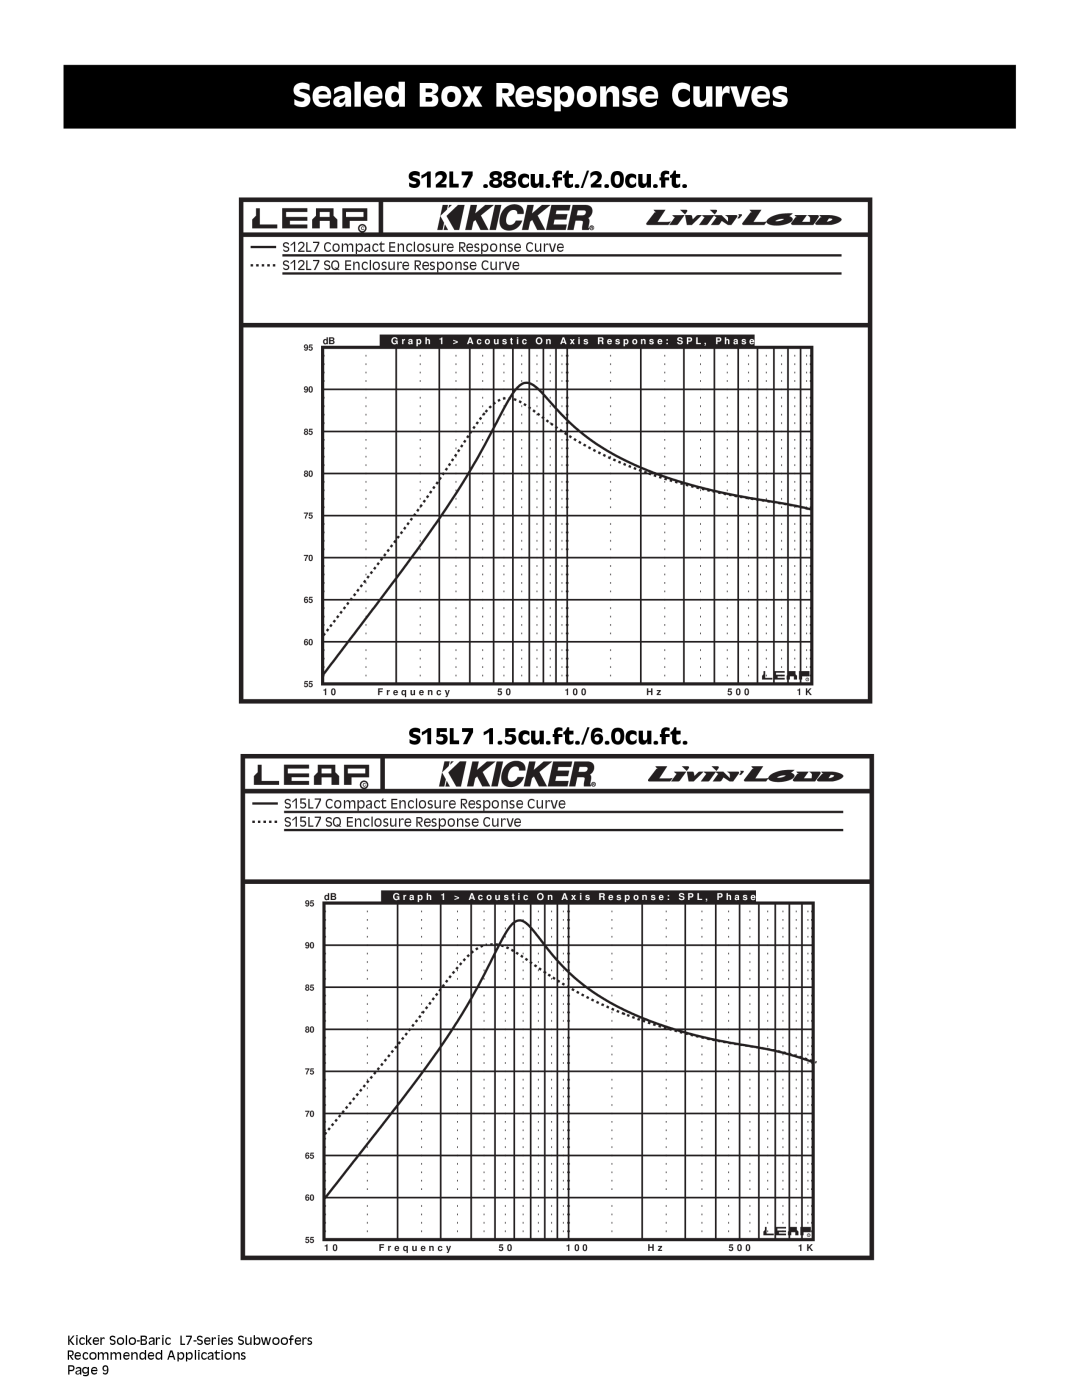 Kicker S12L7 .88cu.ft./2.0cu.ft, S15L7 1.5cu.ft./6.0cu.ft, Sealed Box Response Curves, Recommended Applications Page 